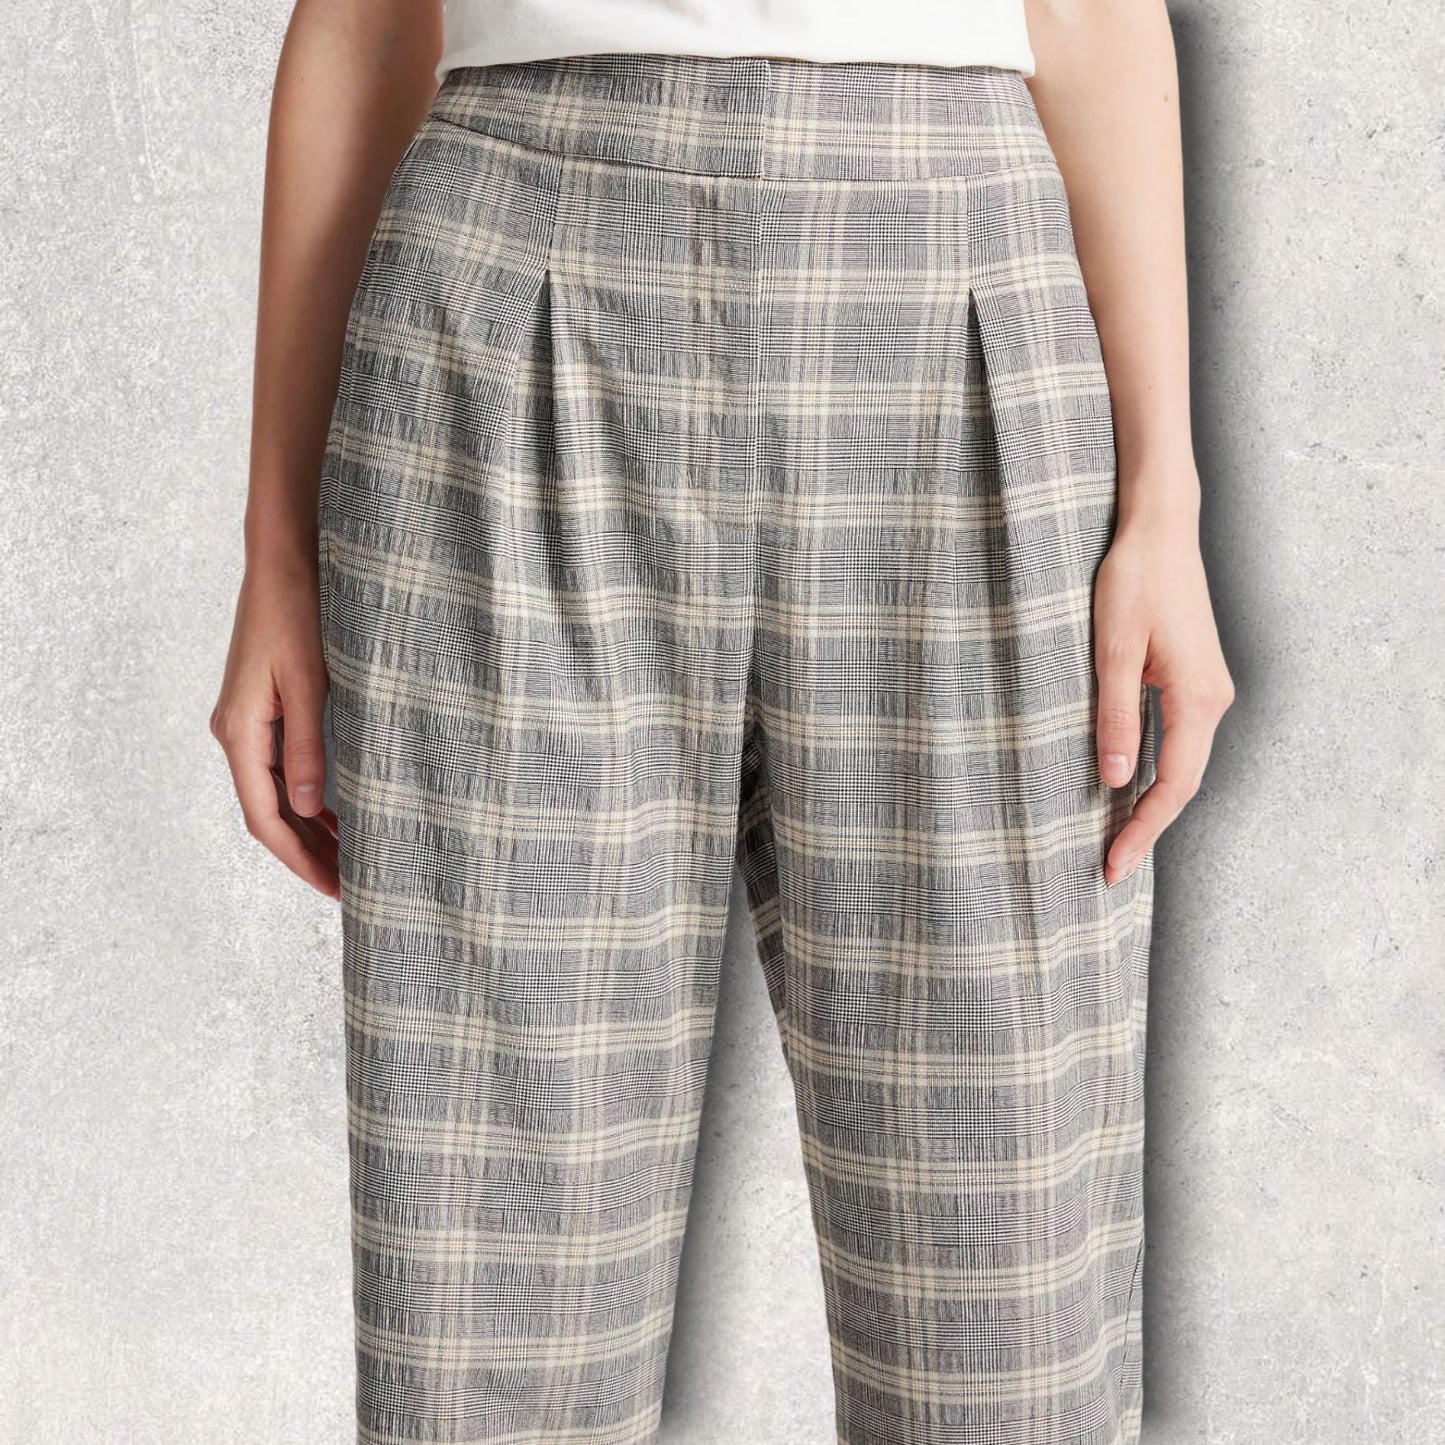 LIMITED EDITION Grey Mix Checked Wide Leg Trousers UK 12 US 8 EU 40 Timeless Fashions